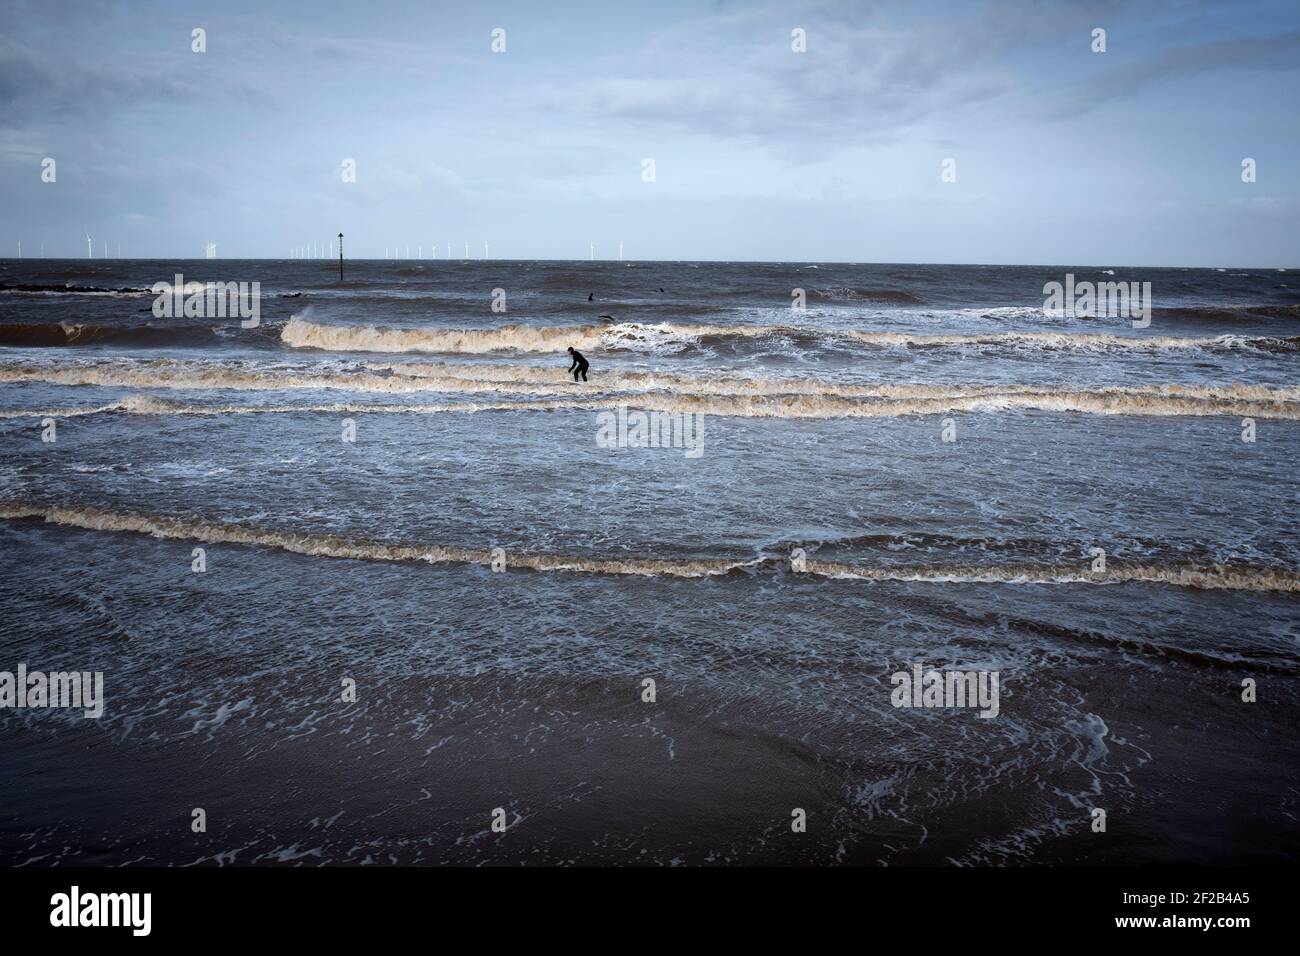 A surfer in the sea in the mouth of the river Mersey. High tides and a storm which swept across the United Kingdom brought favourable conditions for surfing in Leasowe Bay, Merseyside on 11 March, 2021. Stock Photo